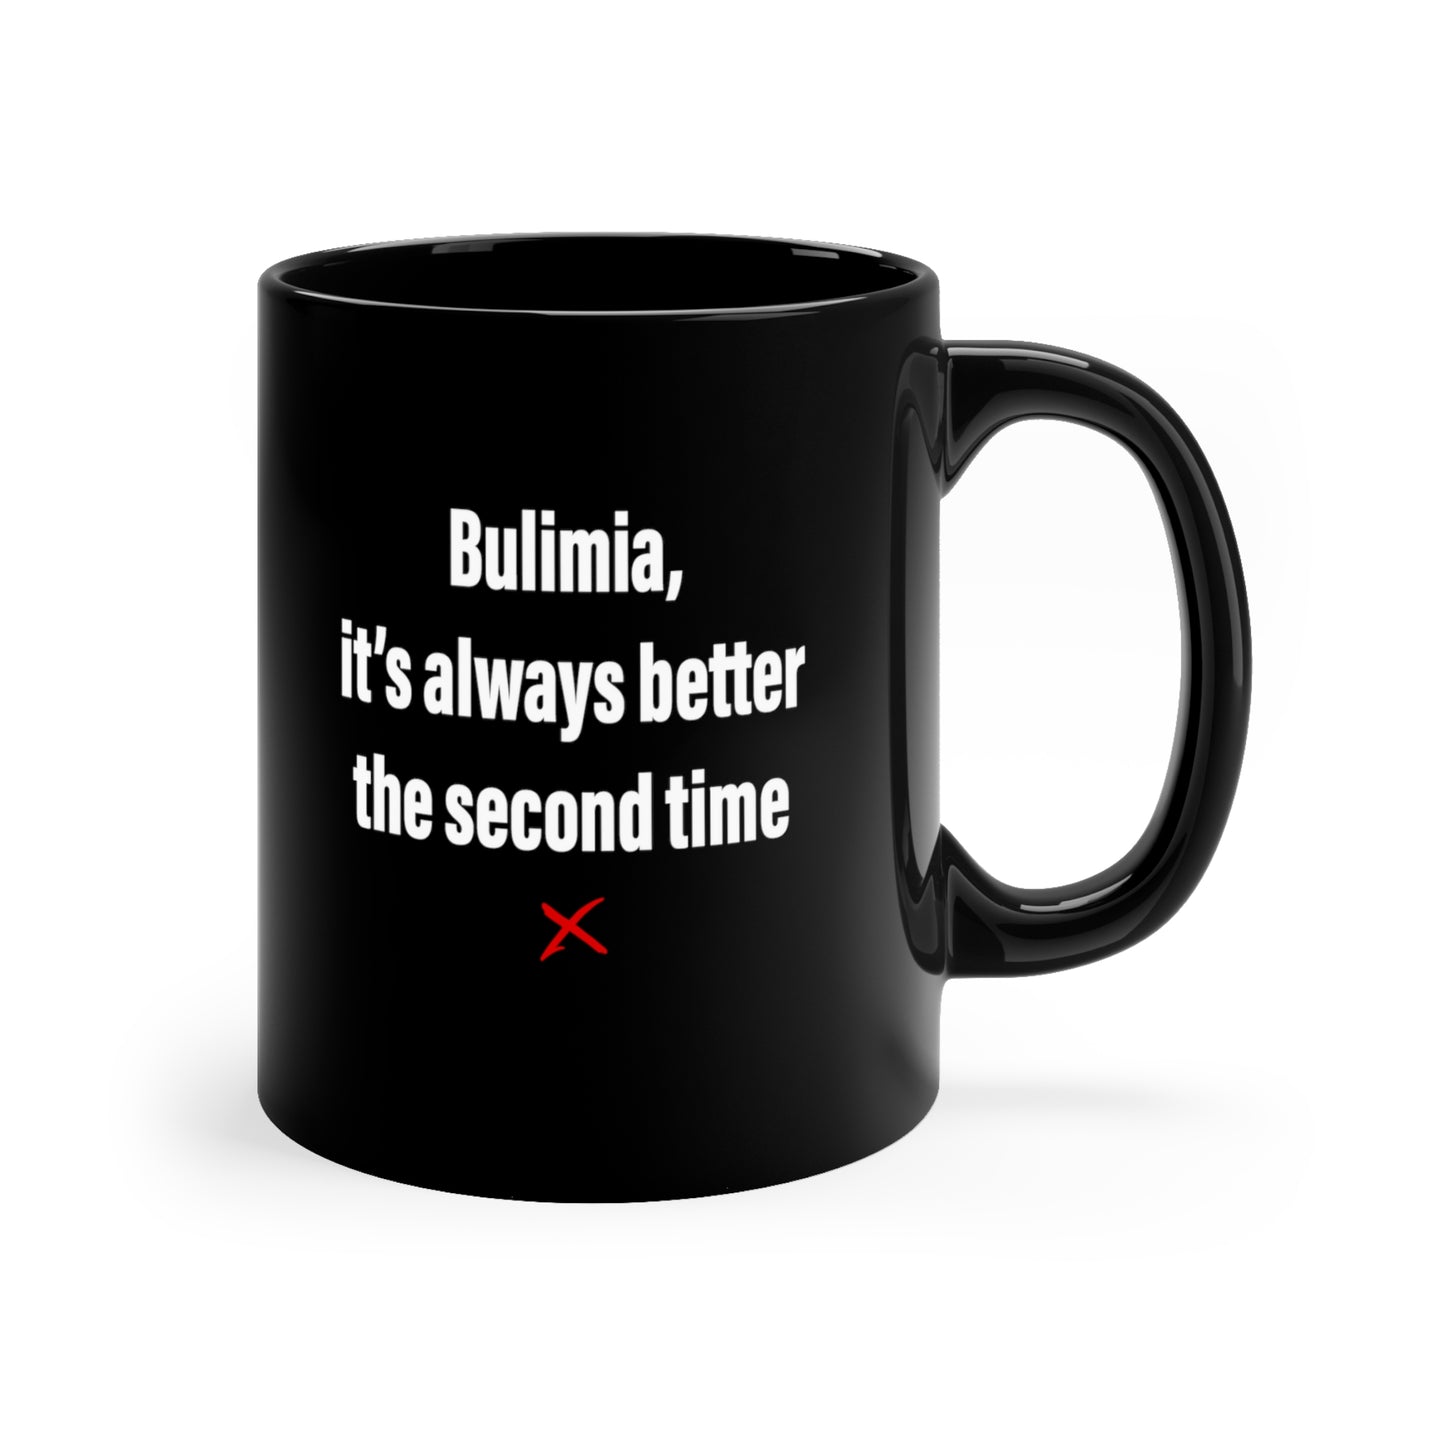 Bulimia, it's always better the second time - Mug